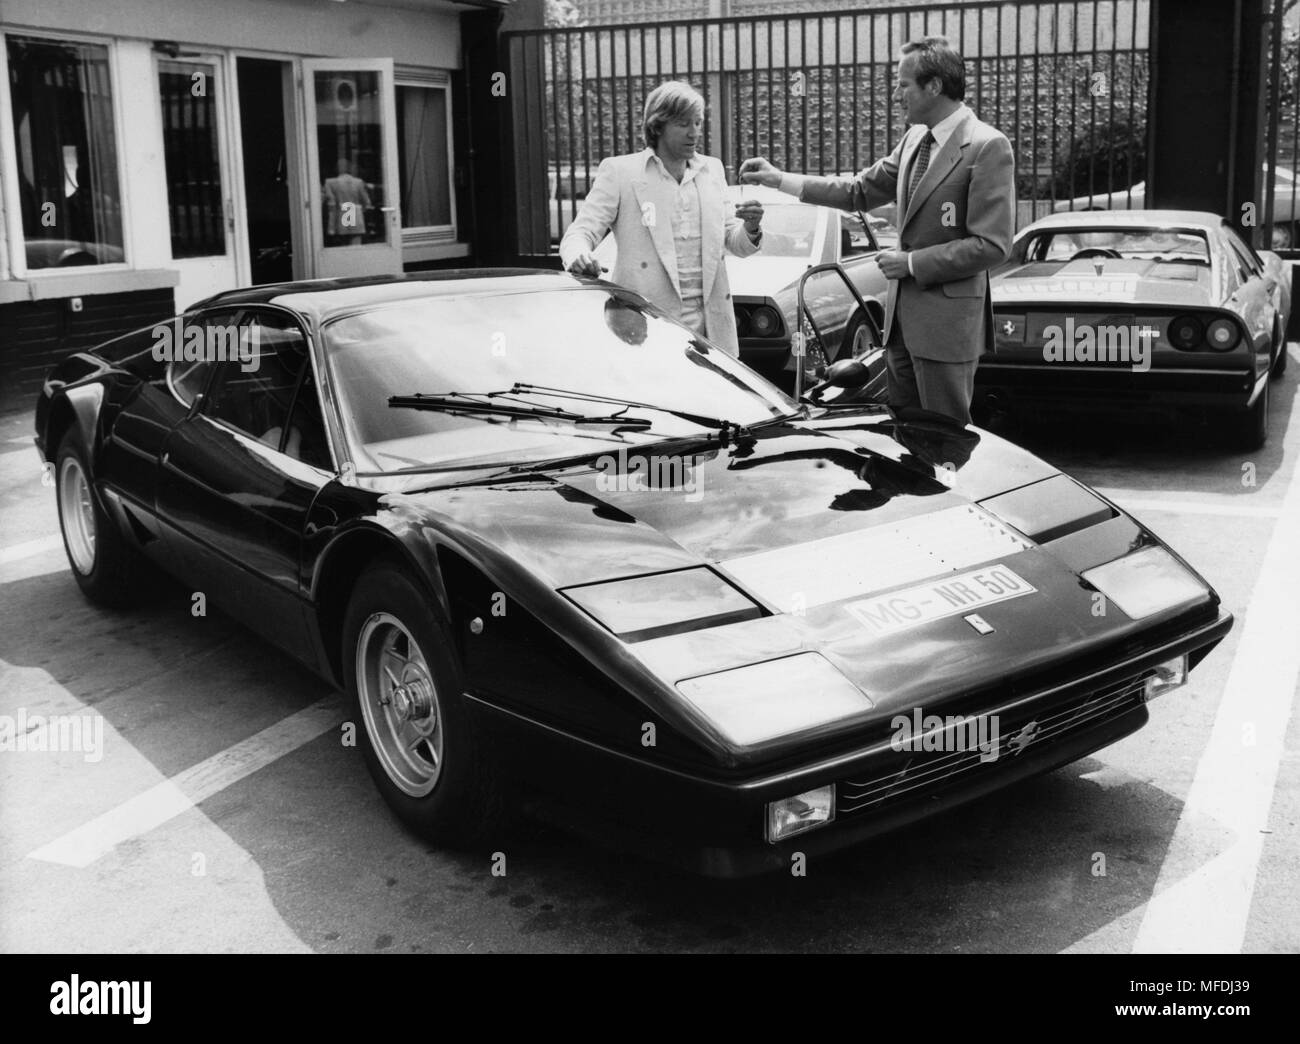 Ex-football star Gunter Netzer (l) agrees even after the end of his active career, the cashier: the pitch-black Ferrari 512 Berlinetta Boxer, the Helmut Becker (r) from the German Ferrari exclusive importer Auto-Becker in Dusseldorf on July 20, 1977 surrendered cost at least 107 000 marks. | usage worldwide Stock Photo